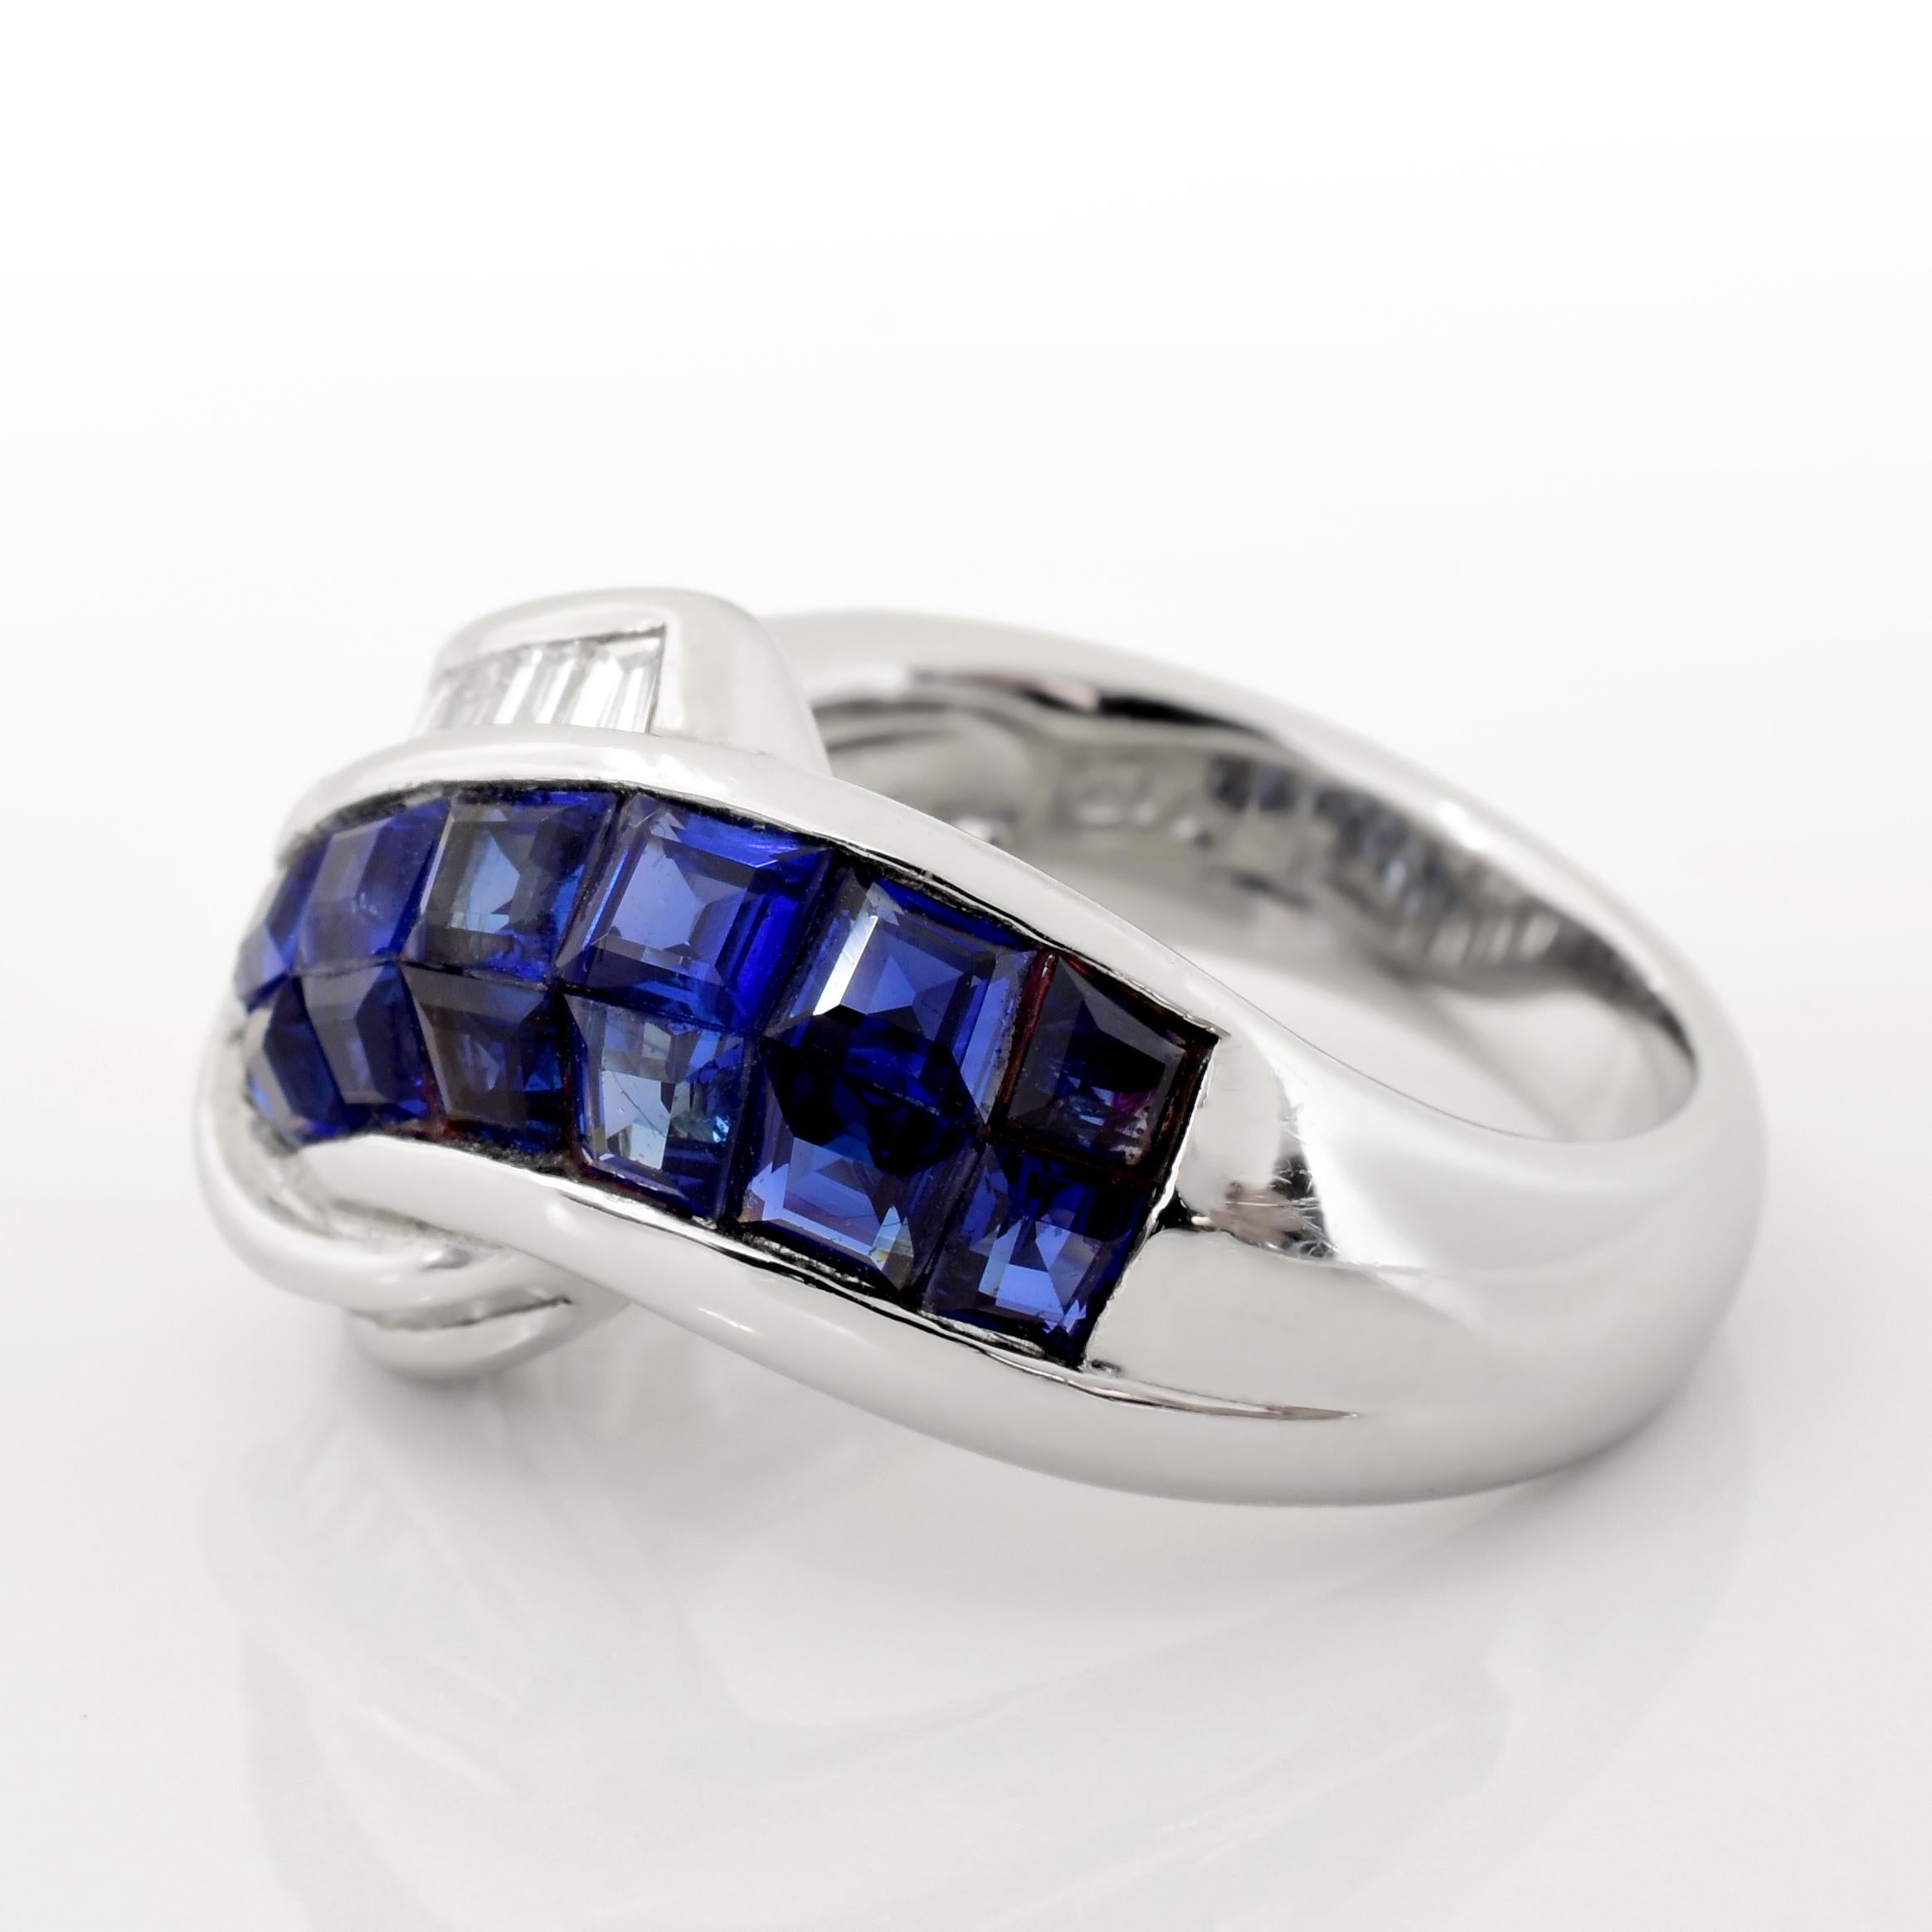 A vintage platinum ring with an overlapping diamond and sapphire design. There are approximately 2.49 carats of French cut sapphires and 1.10 carats of baguette cut diamonds.